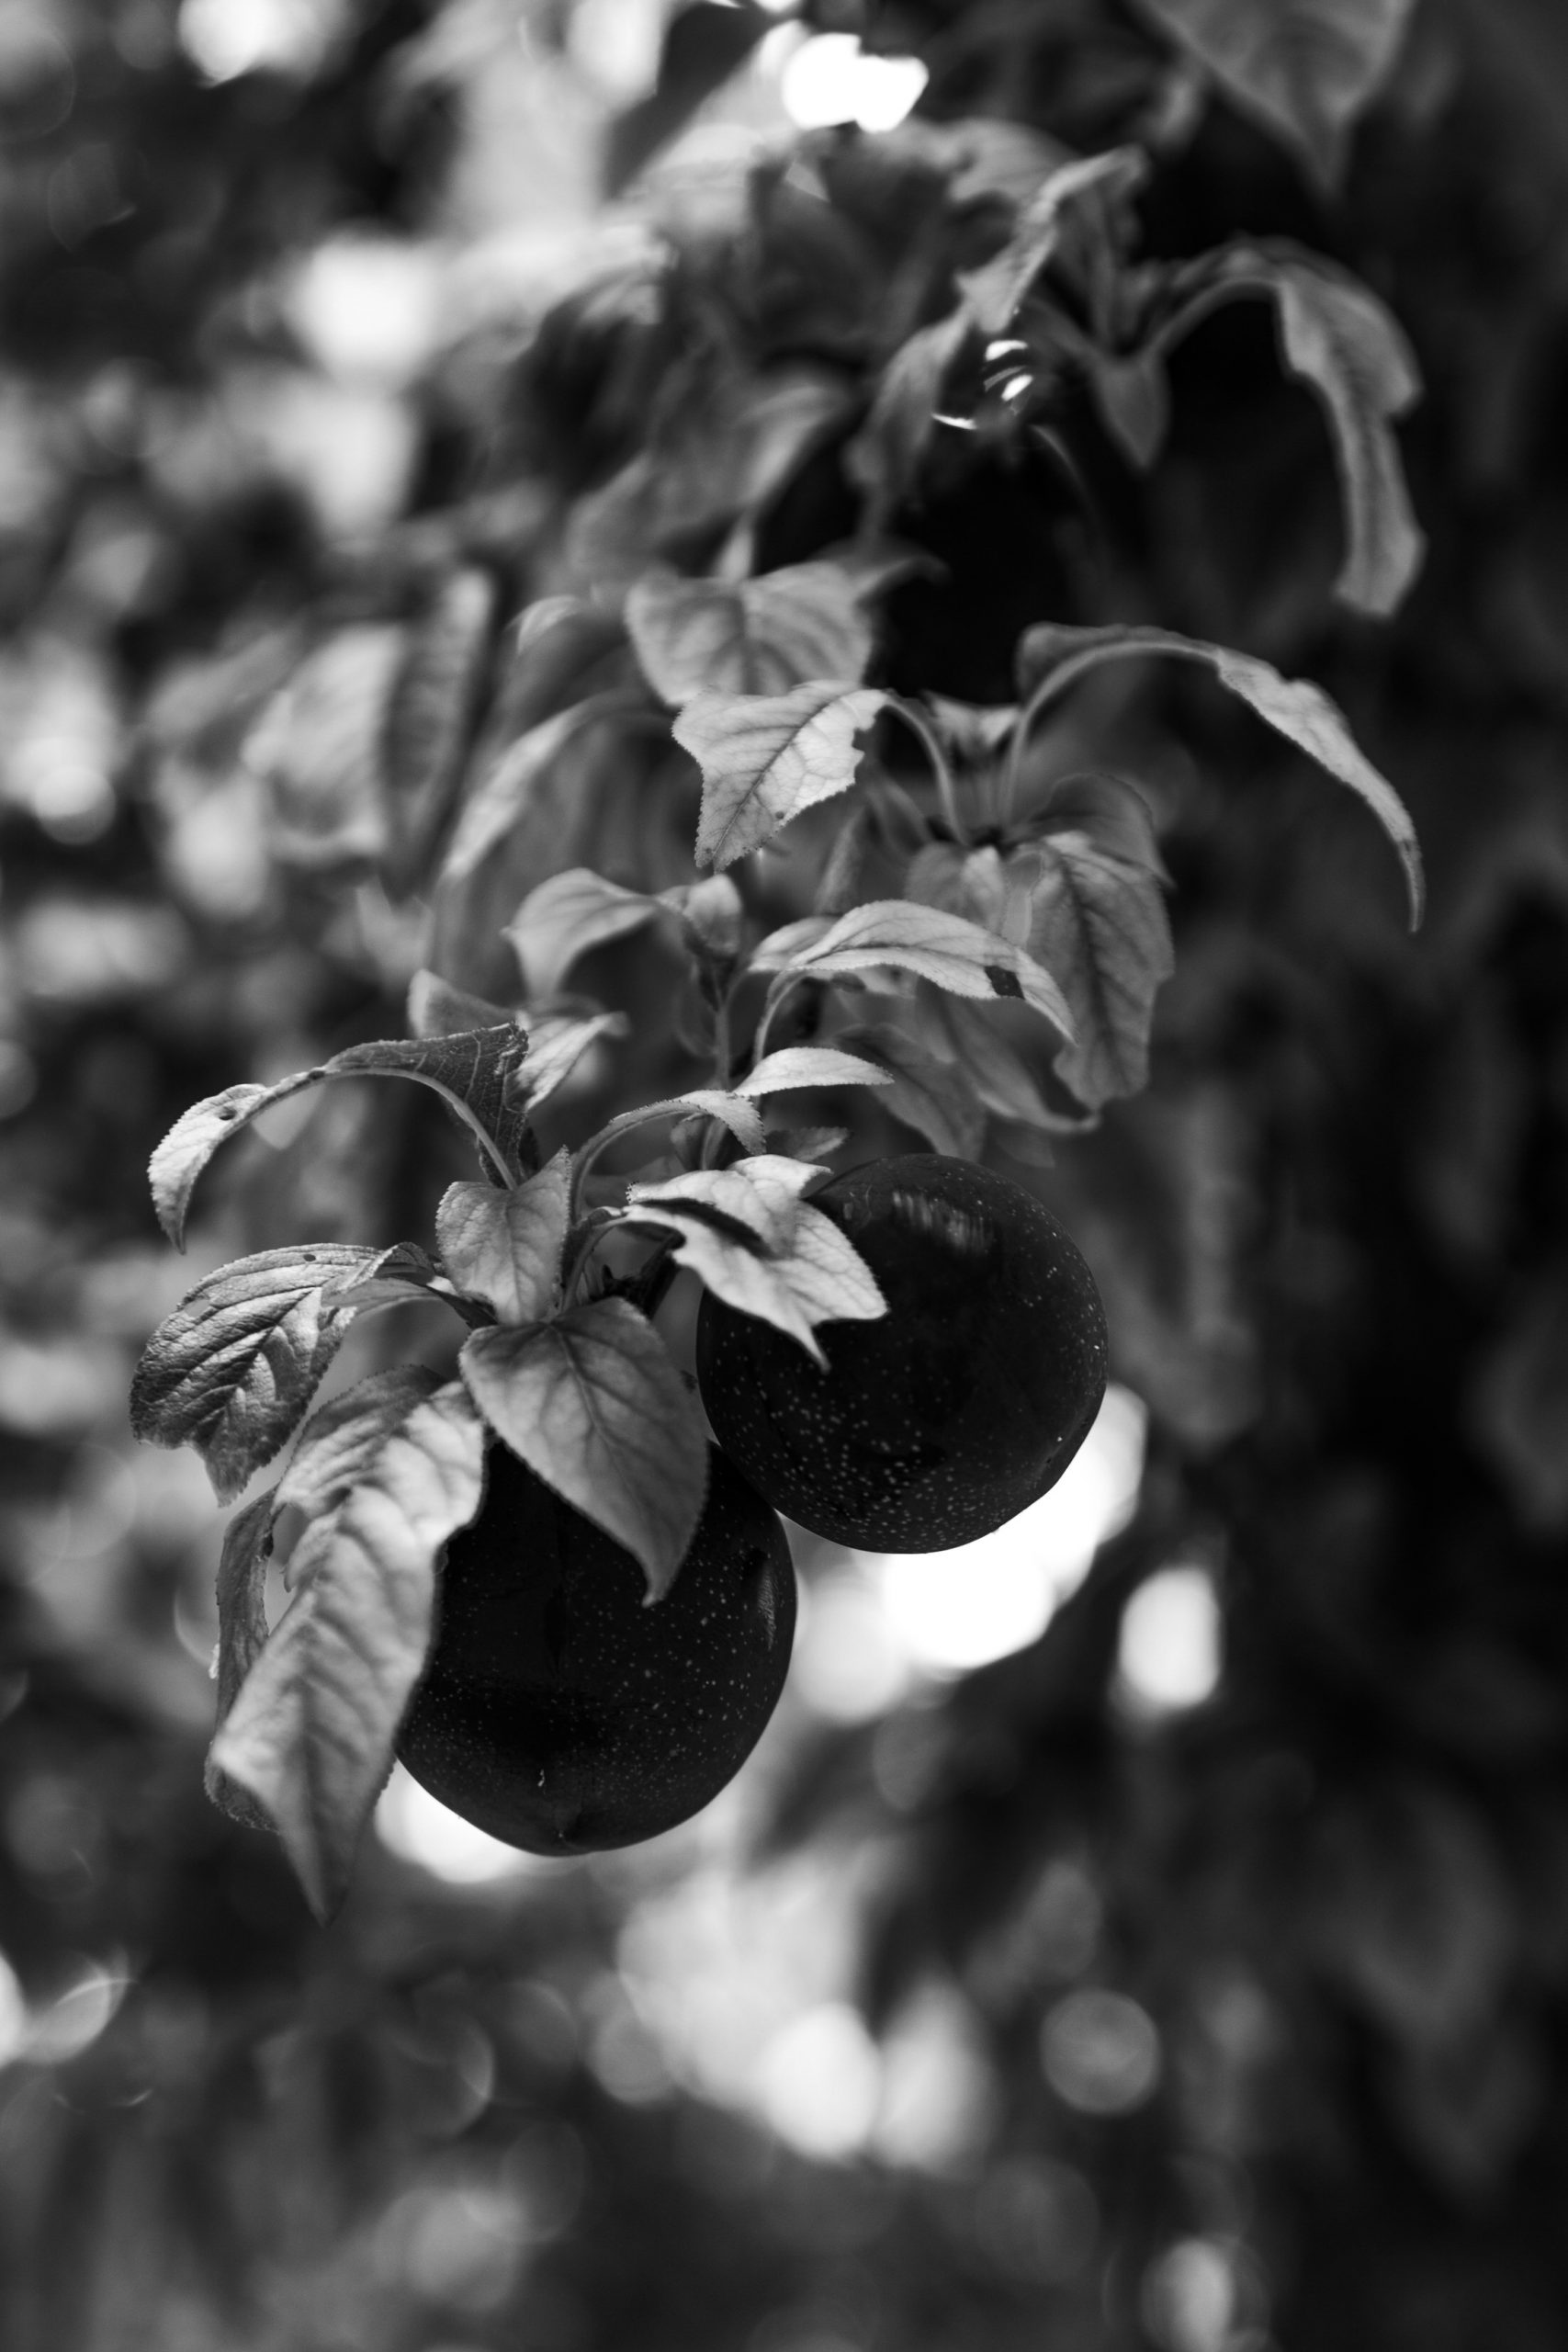 Black and white image of two purple plums hangin in a tree